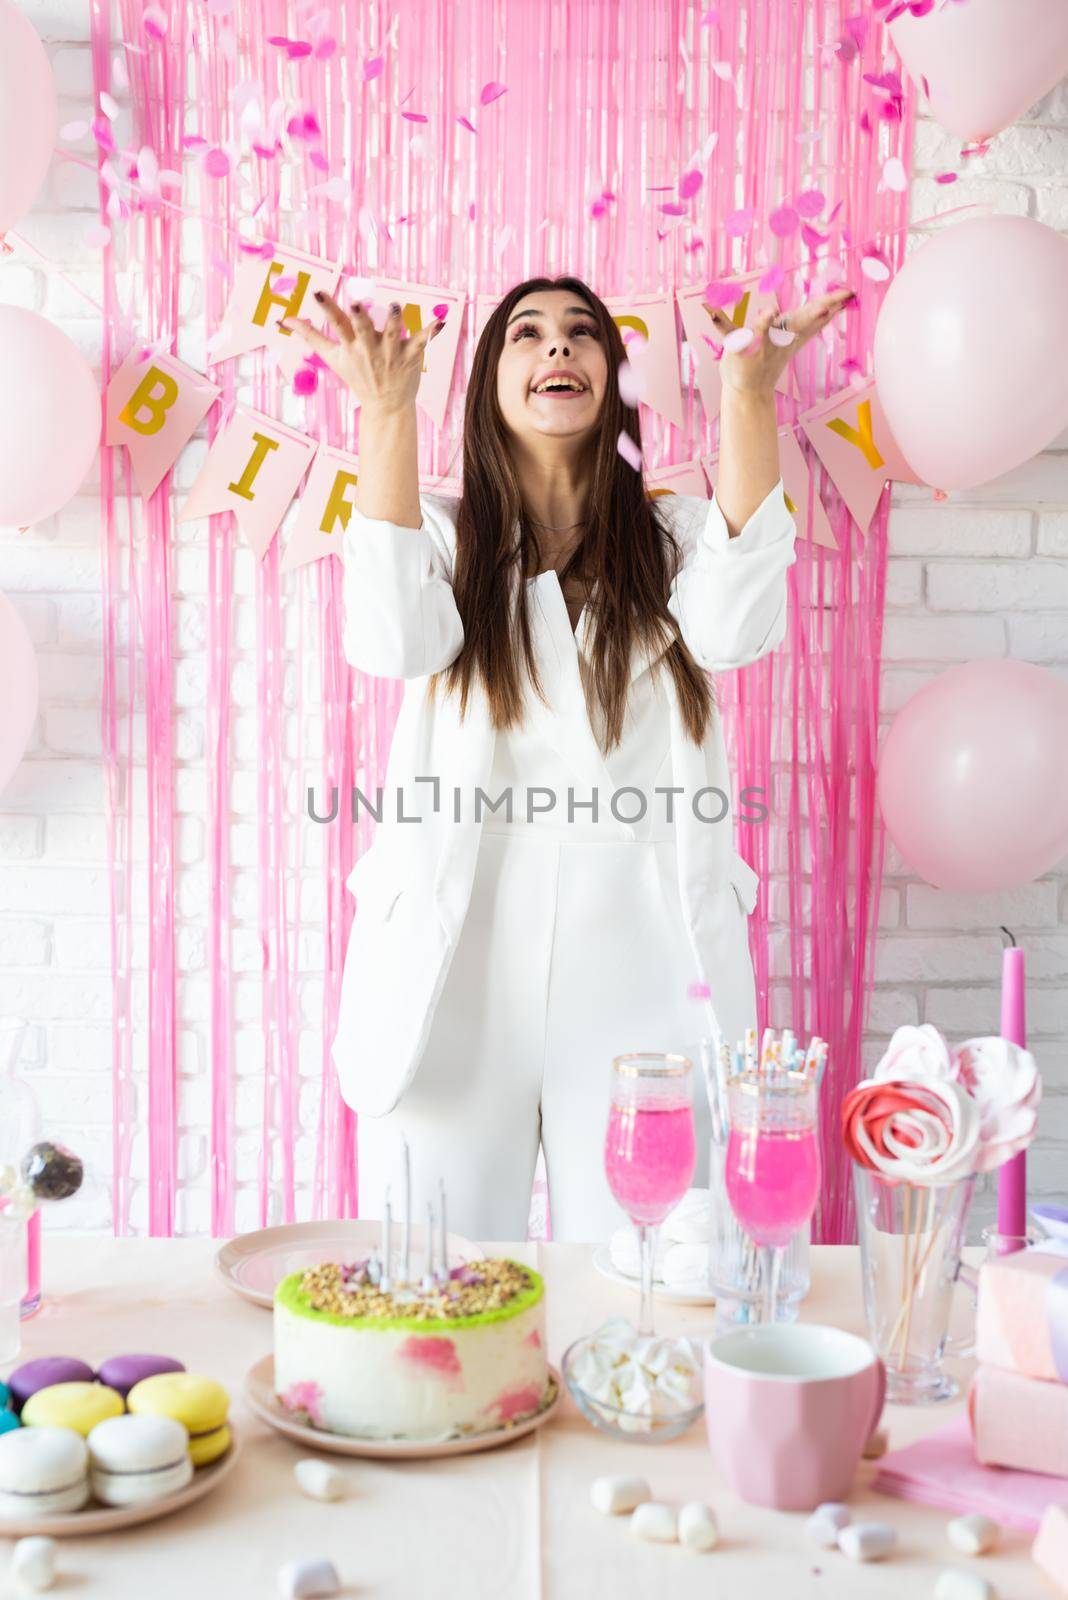 Birthday party. Birthday tables. Attractive brunette woman in white party clothes preparing birthday table with cakes, cakepops, macarons and other sweets, throwing pink confetti